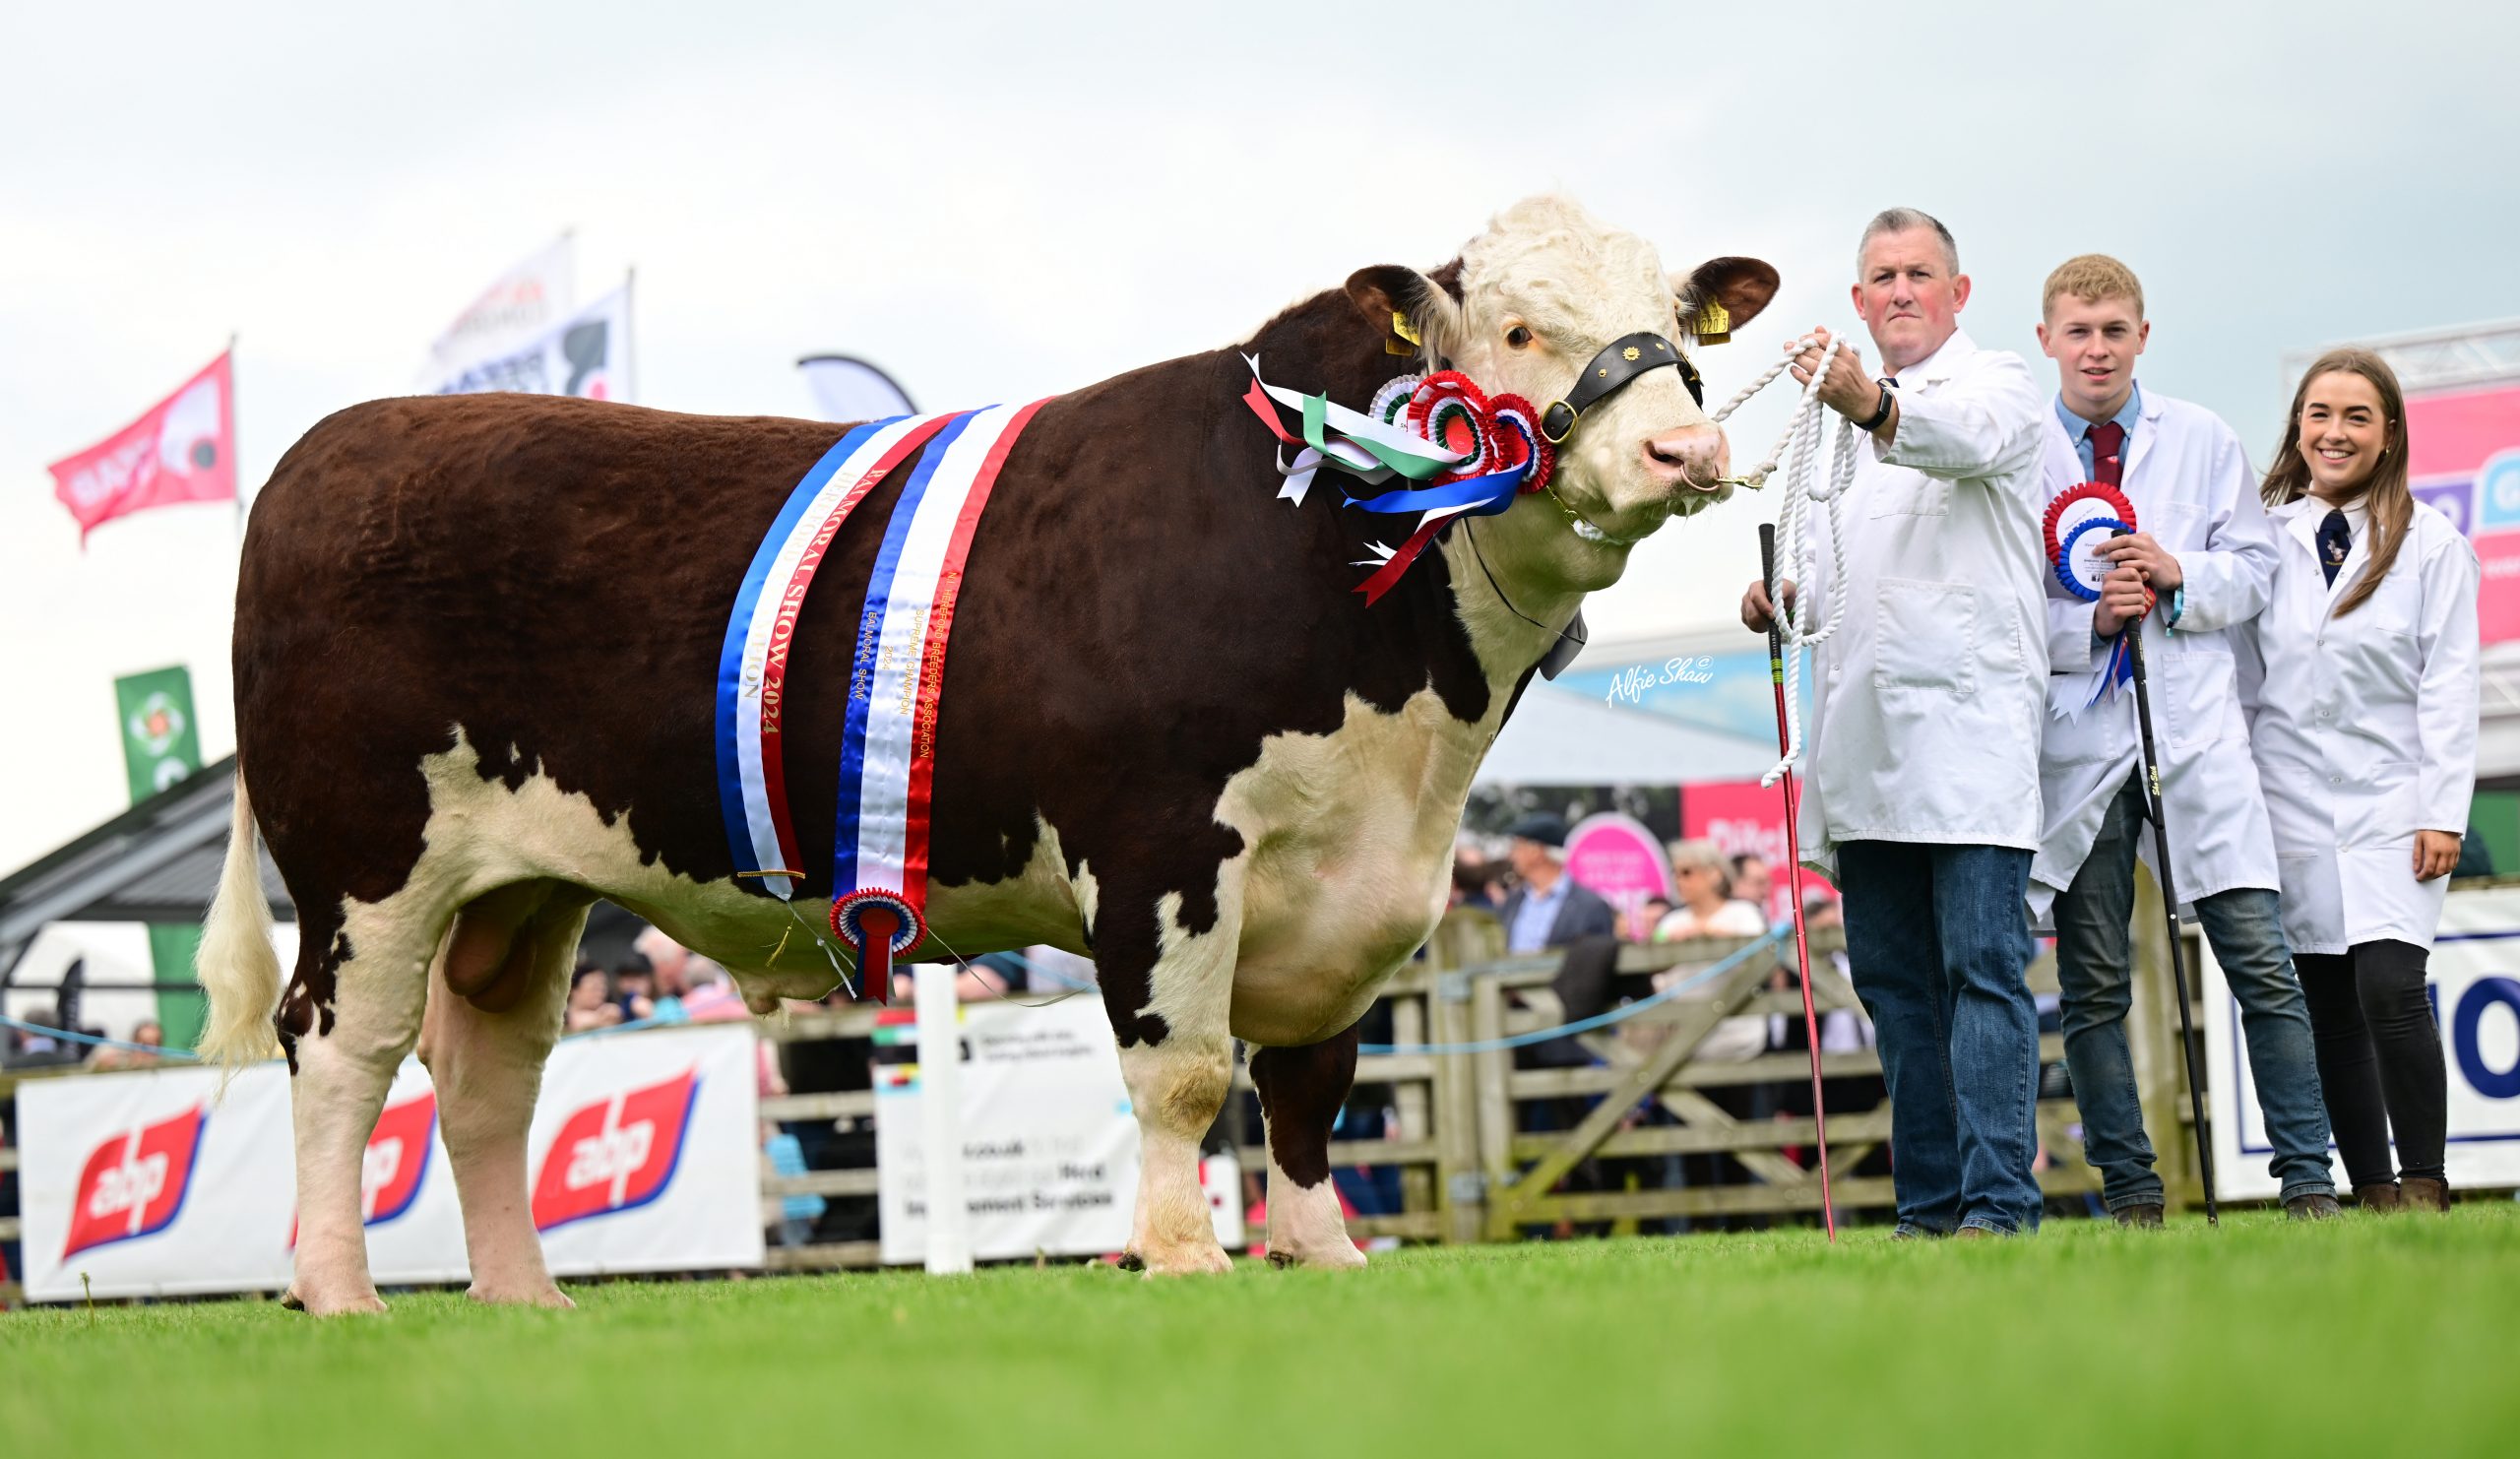 Supreme Hereford Champion and winner of the senior bull class, KINGLEE 1 VICTORIOUS, exhibited by Mr Trevor Andrews